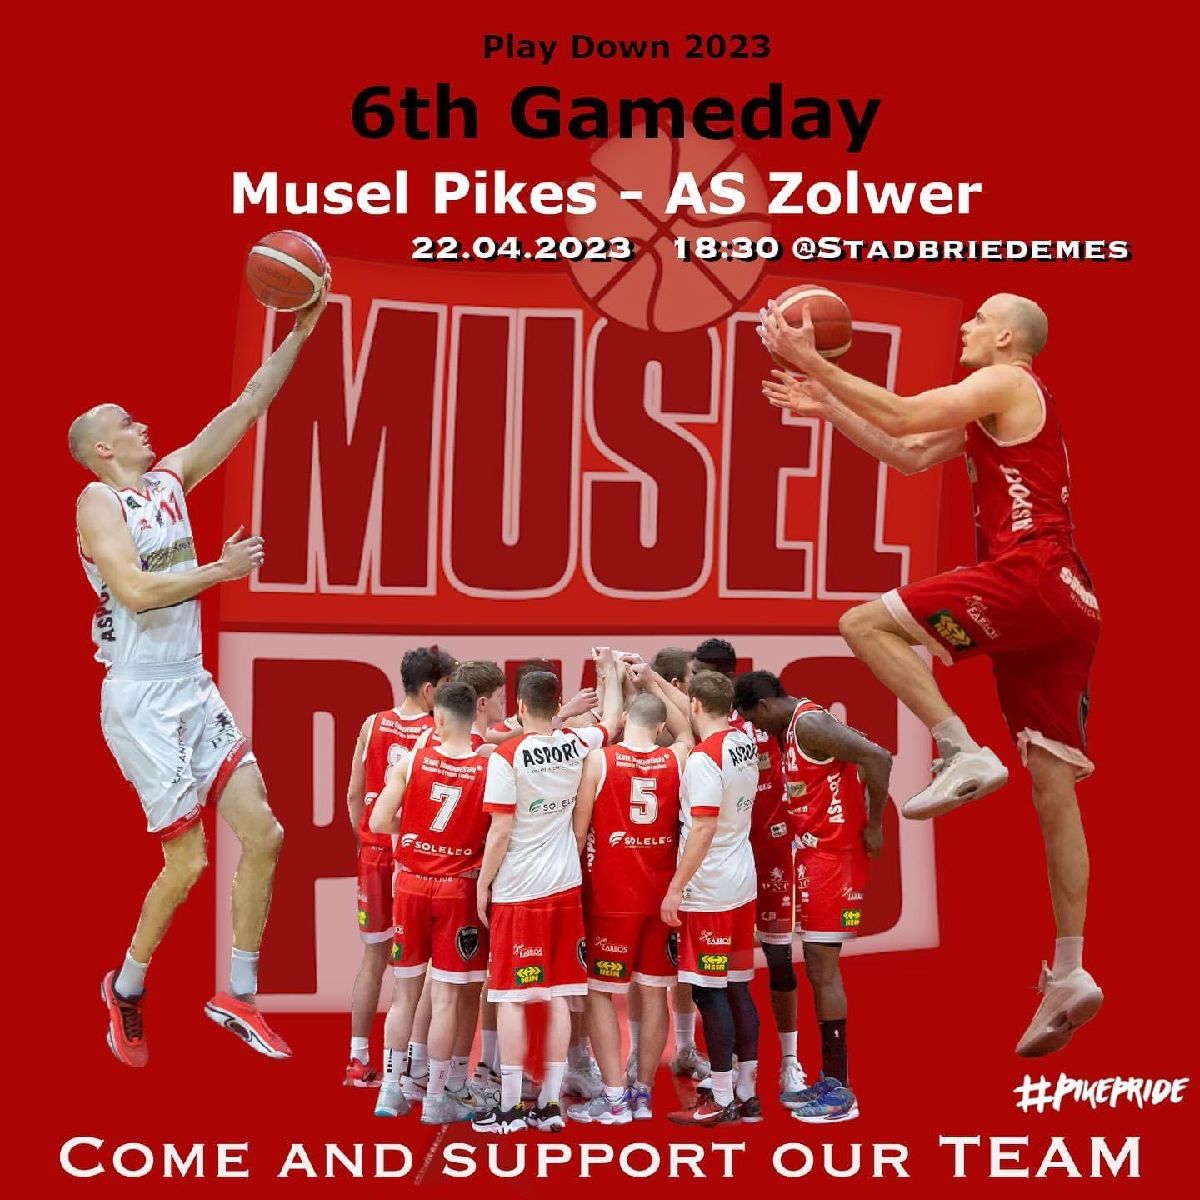 Musel Pikes-AS Zolwer